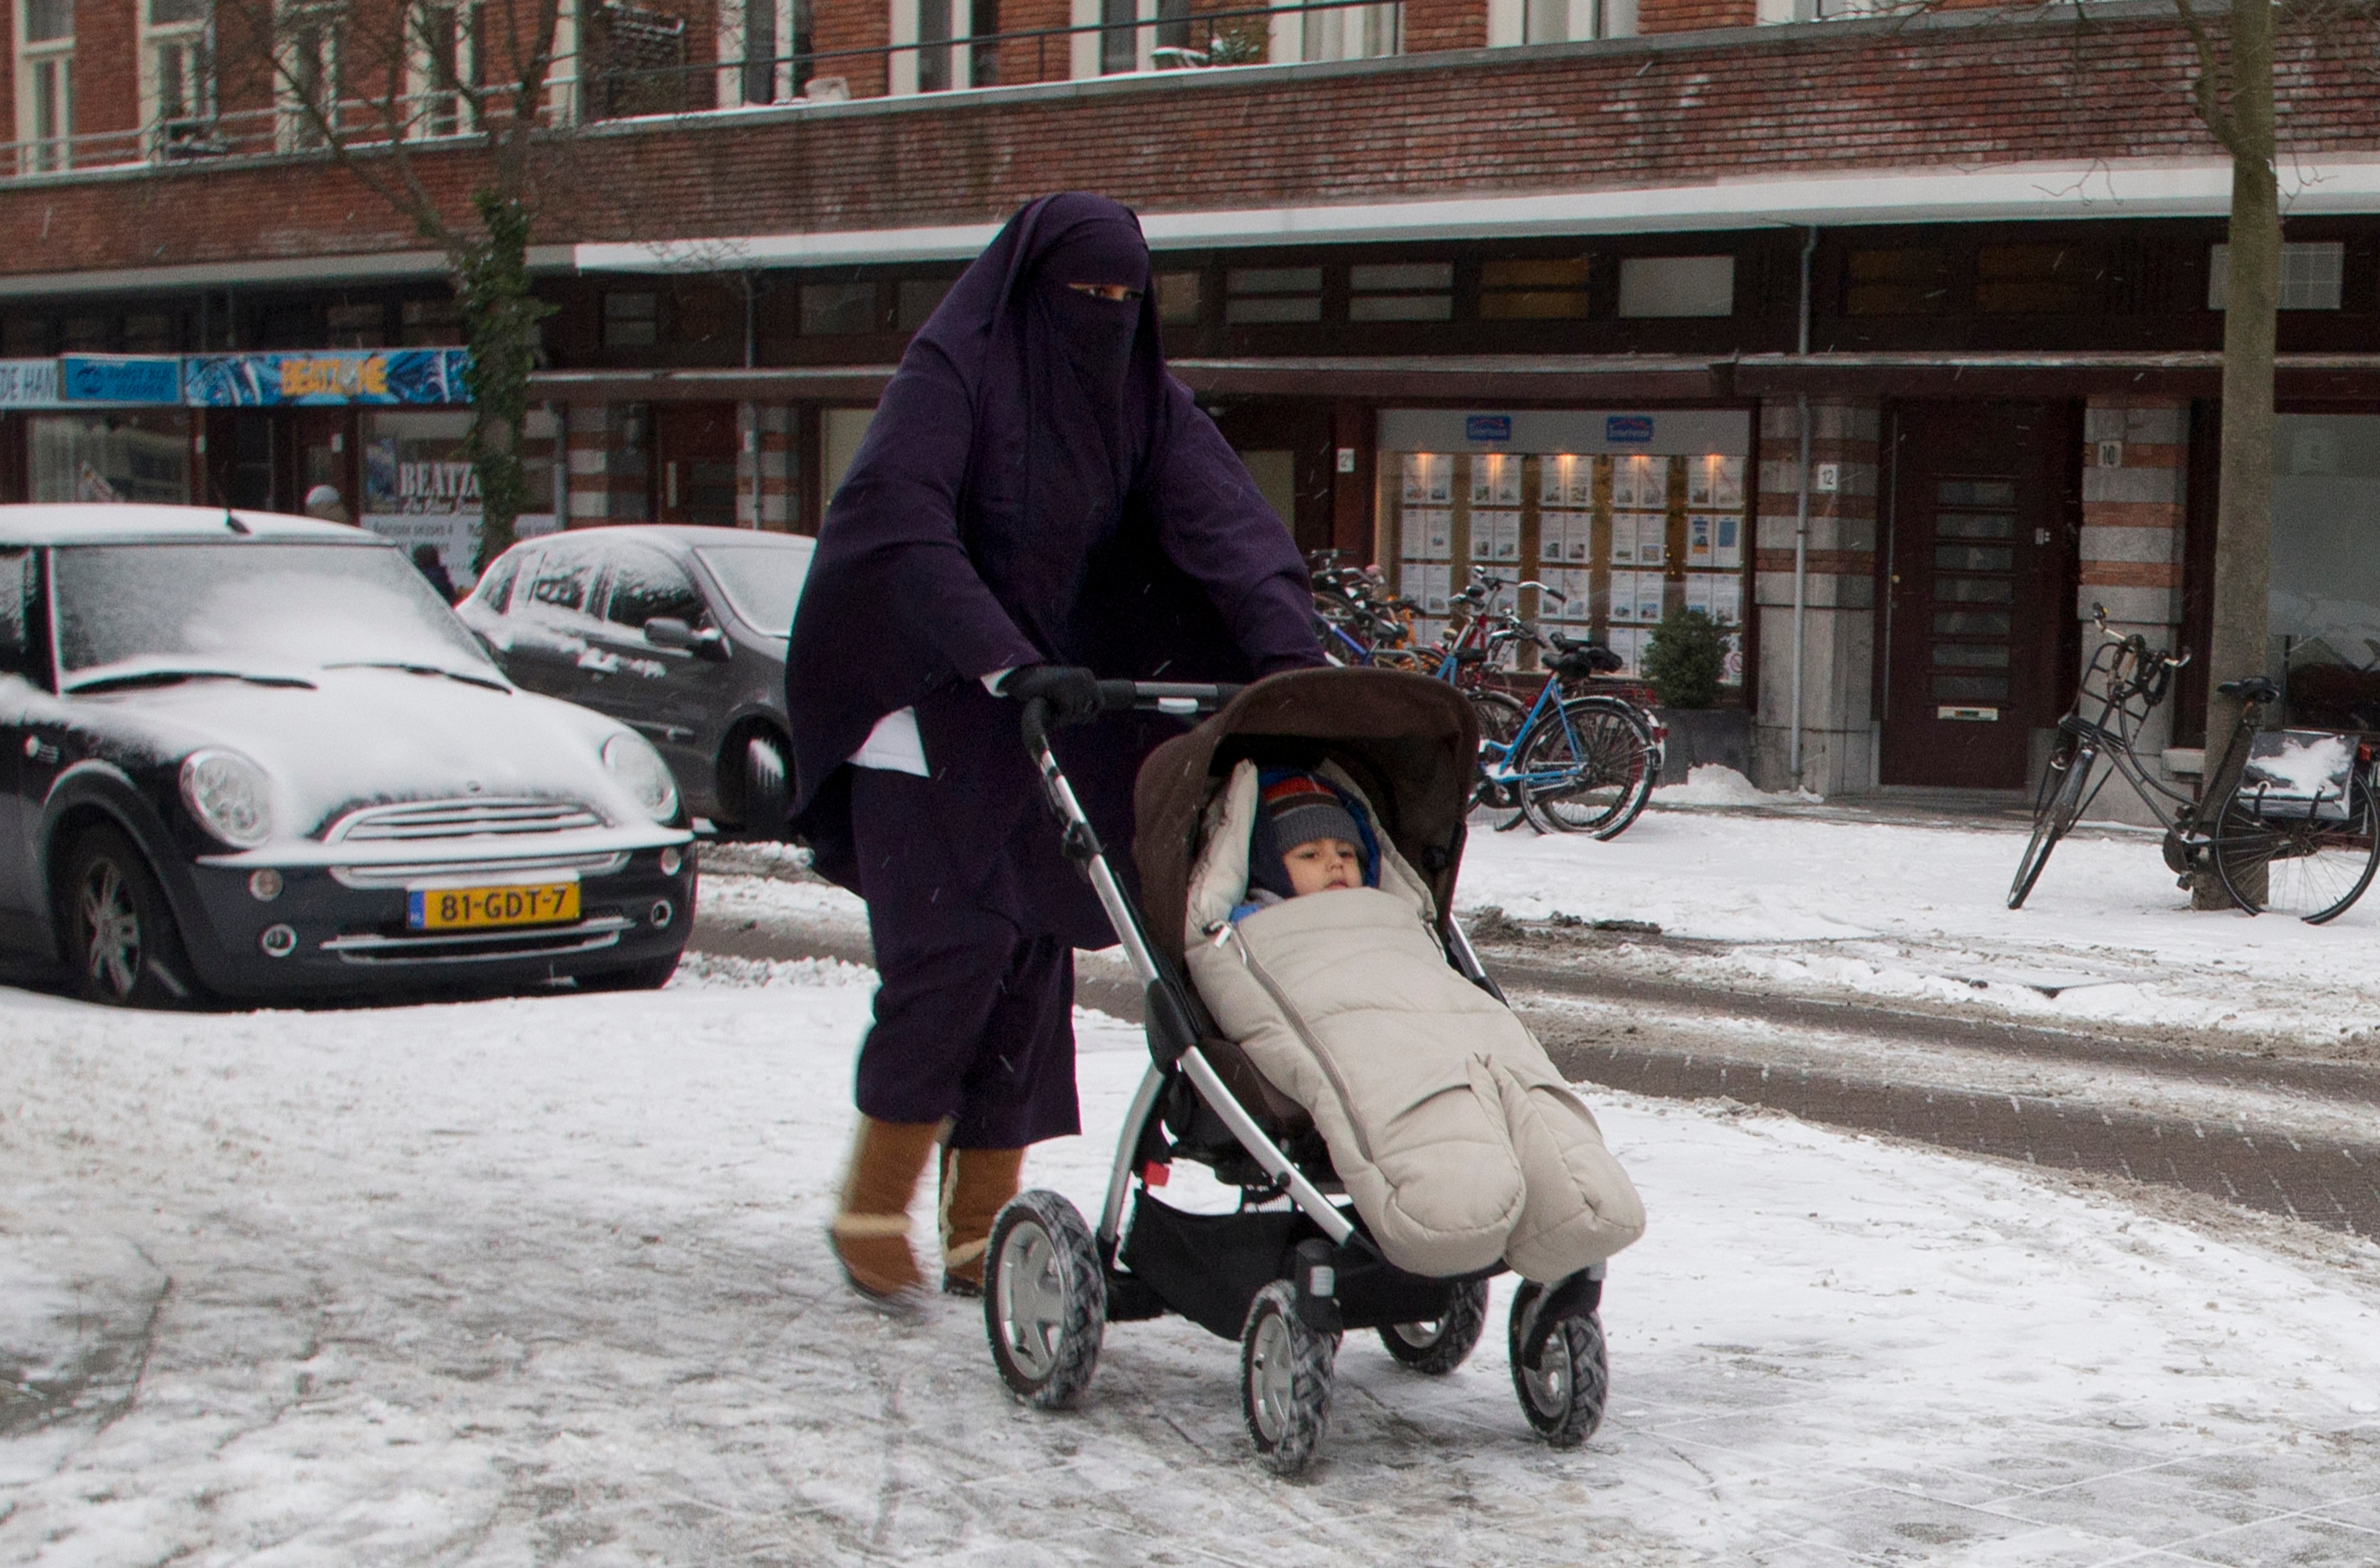 A woman wearing a niqab pushes a baby stroller on snow-covered streets in Amsterdam.